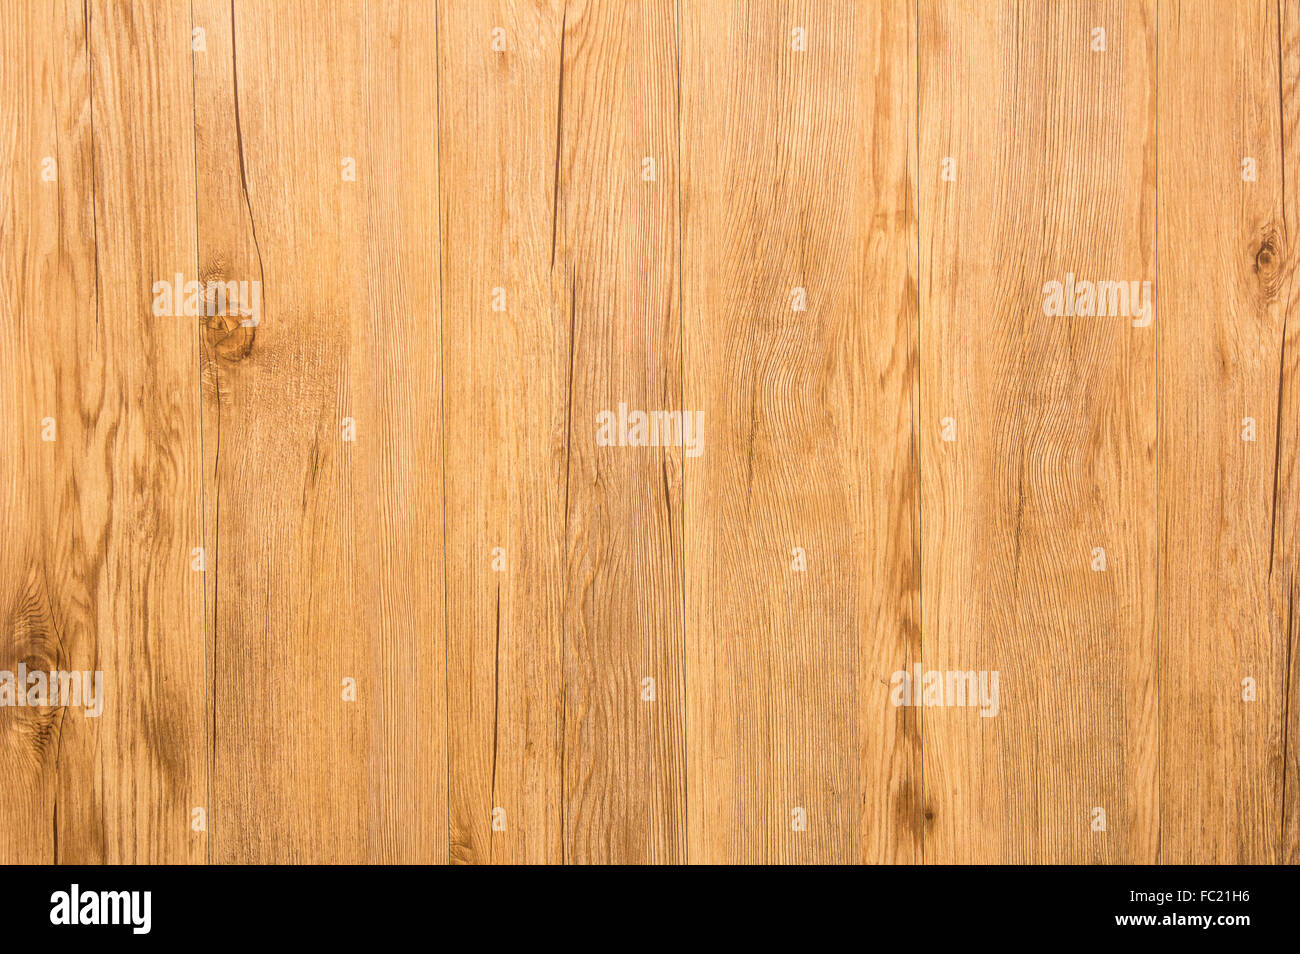 Texture of wood pattern background, low relief texture of the surface can be seen Stock Photo